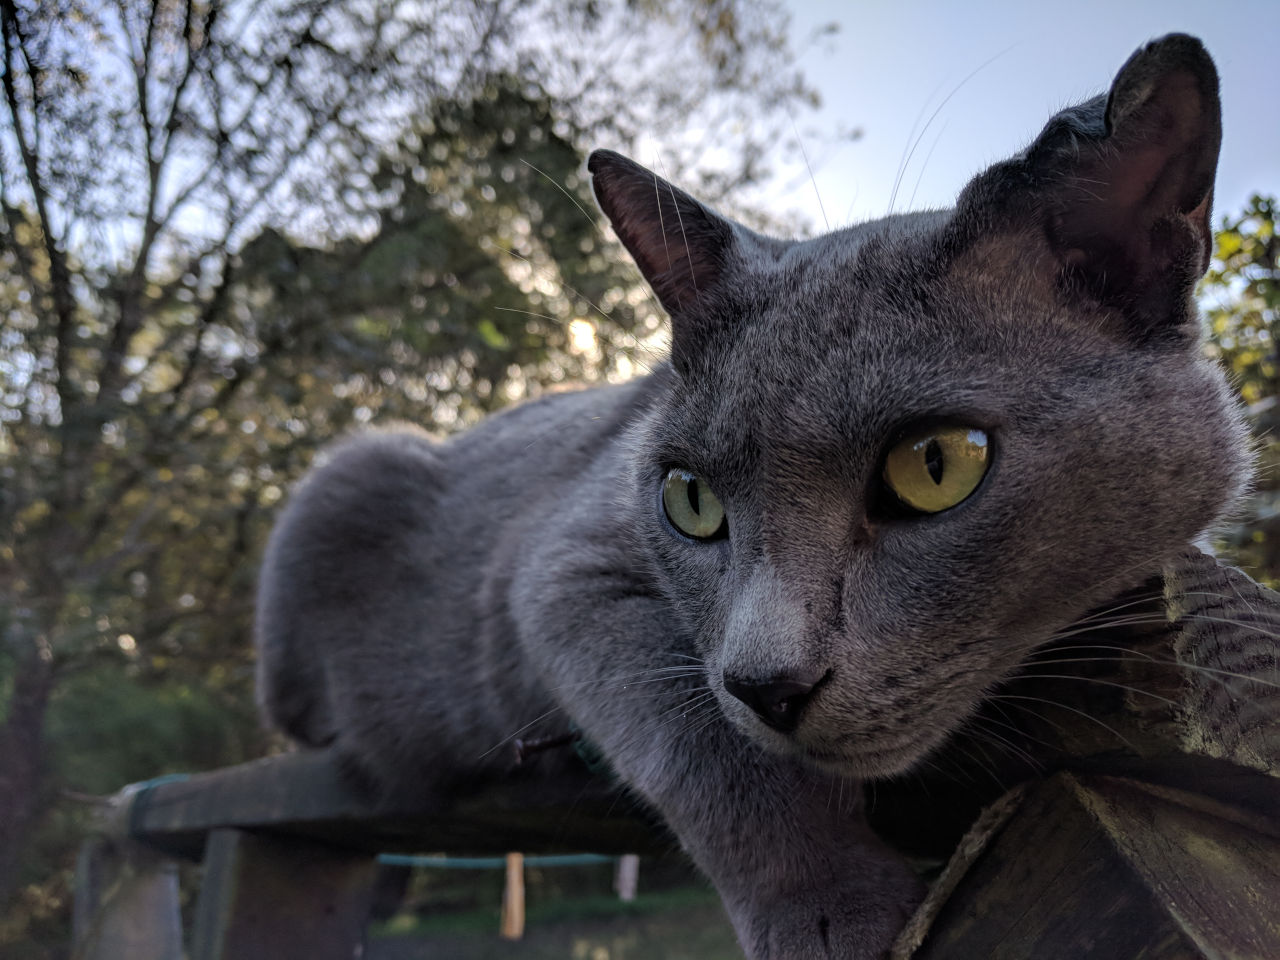 Panther, a solid gray cat, lying atop a clothesline post